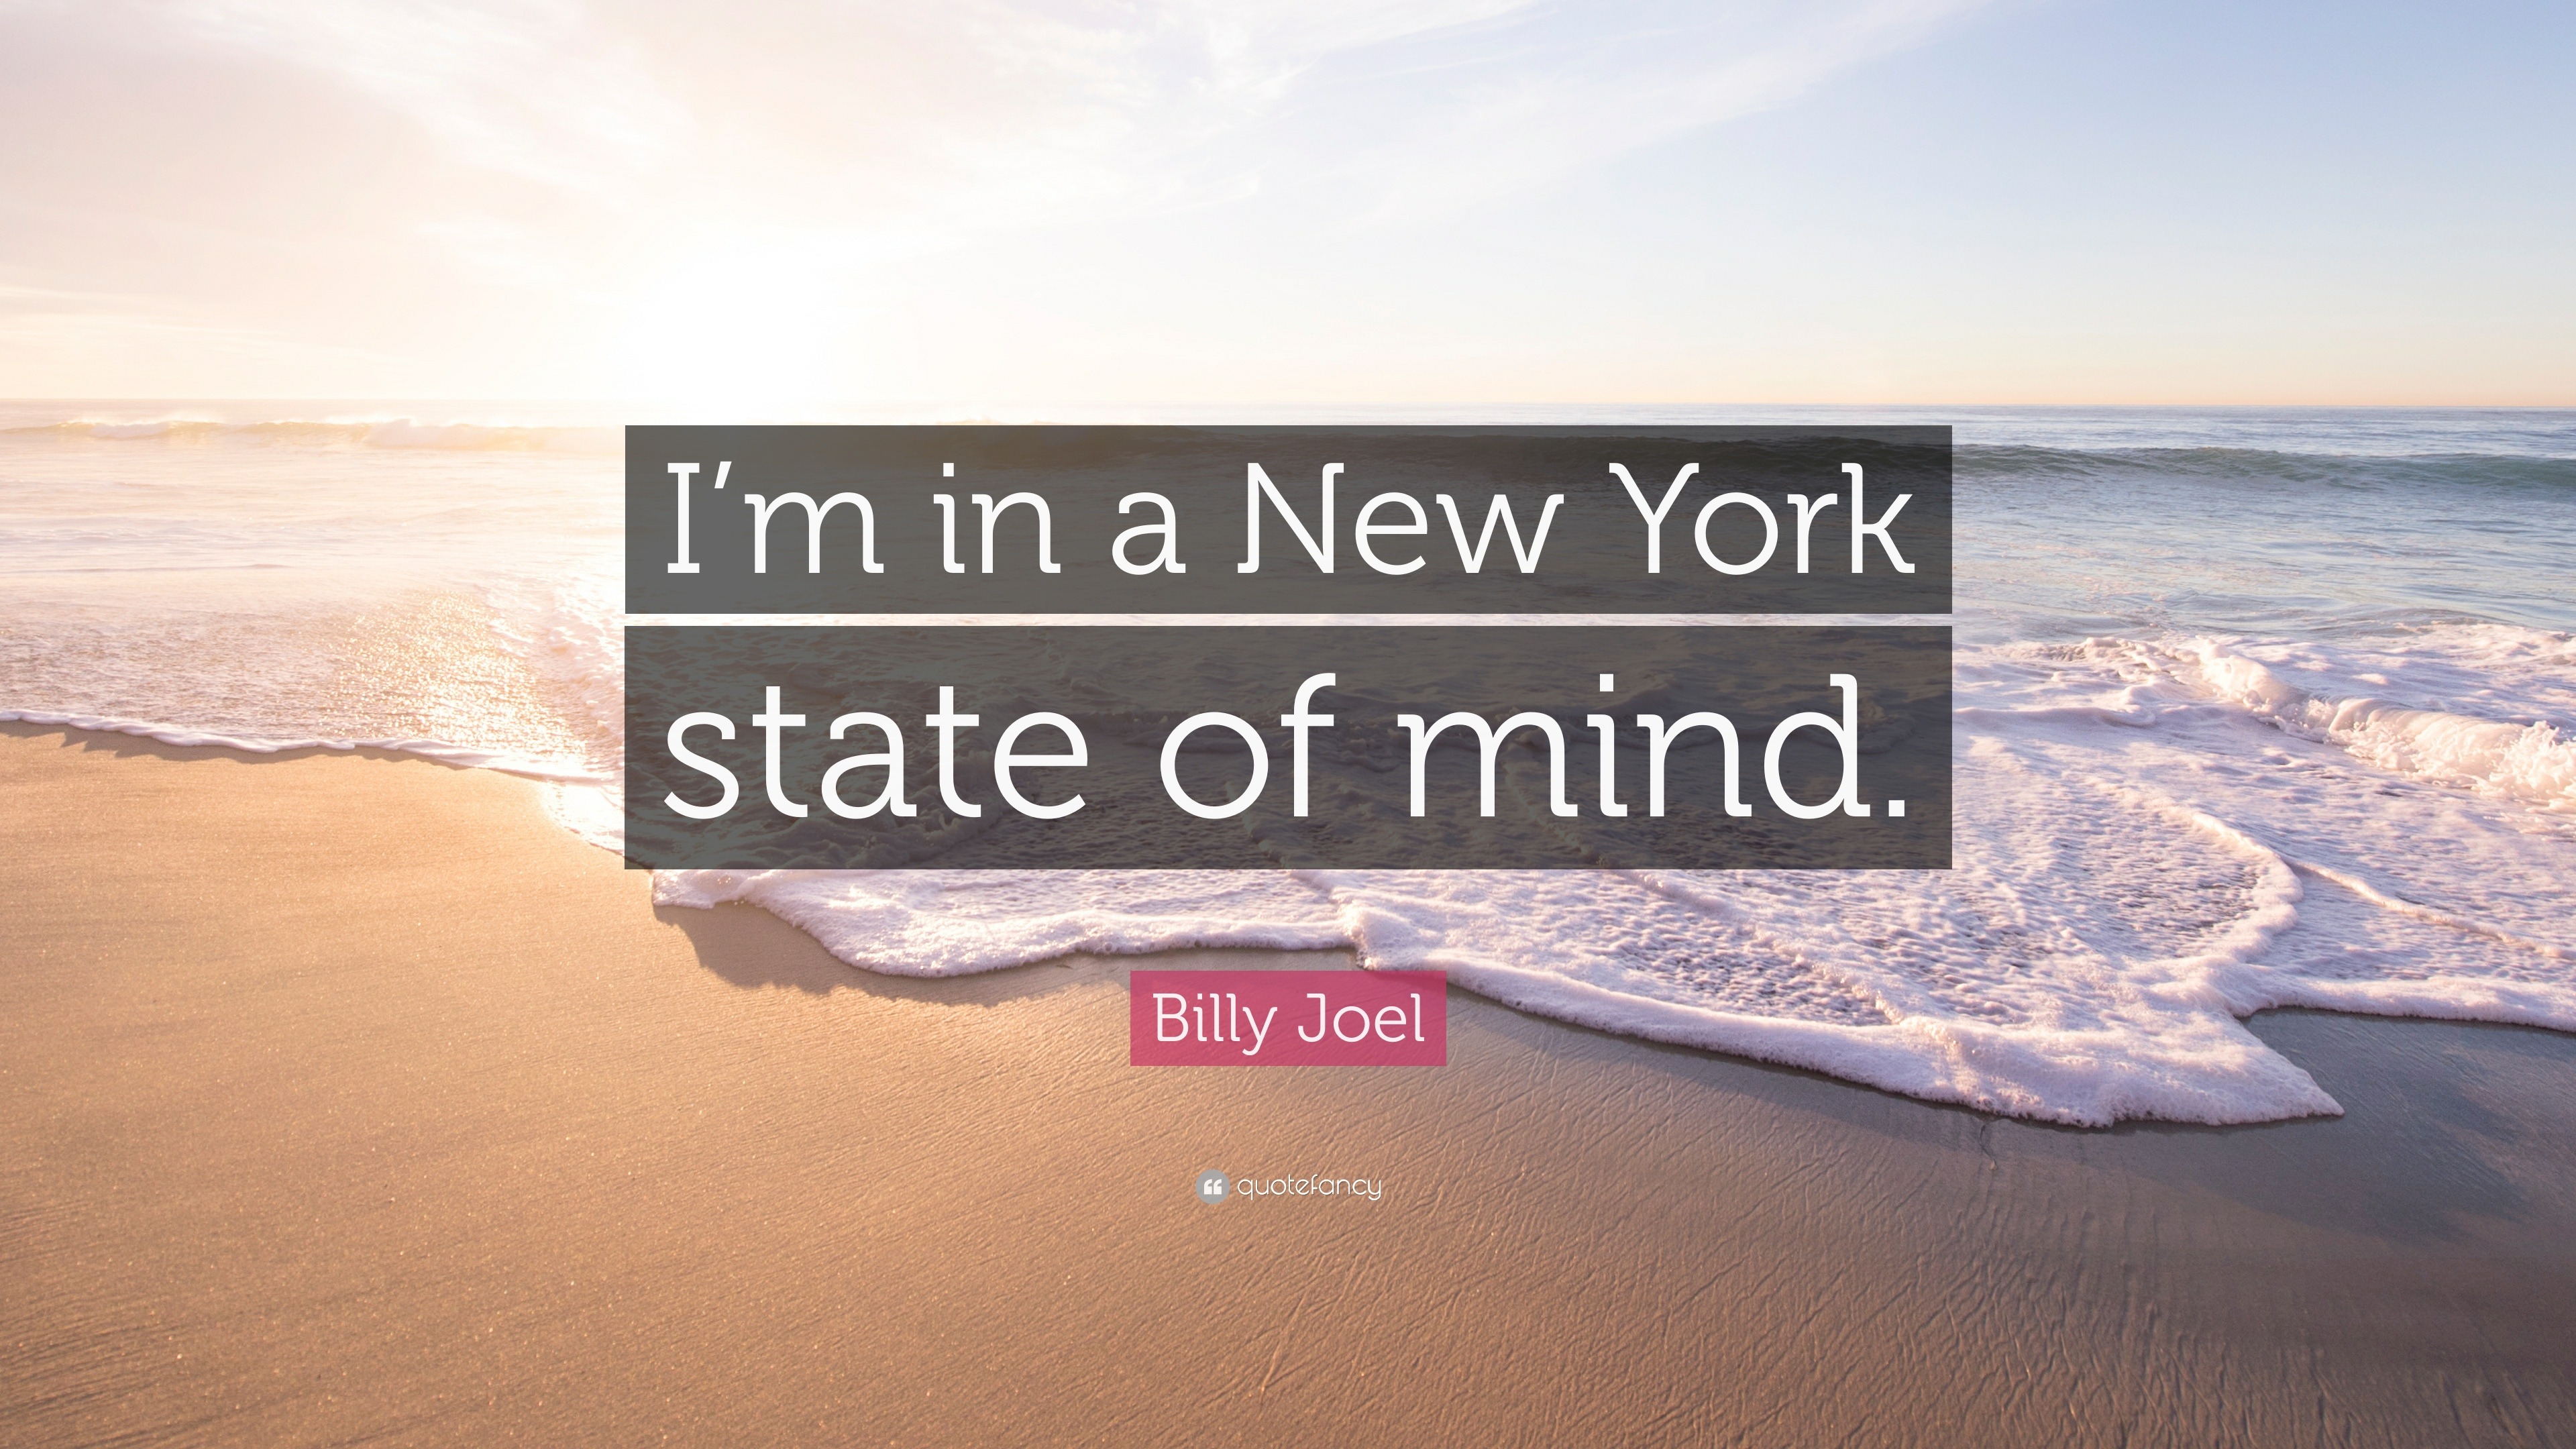 New York State of Mind', All Of It